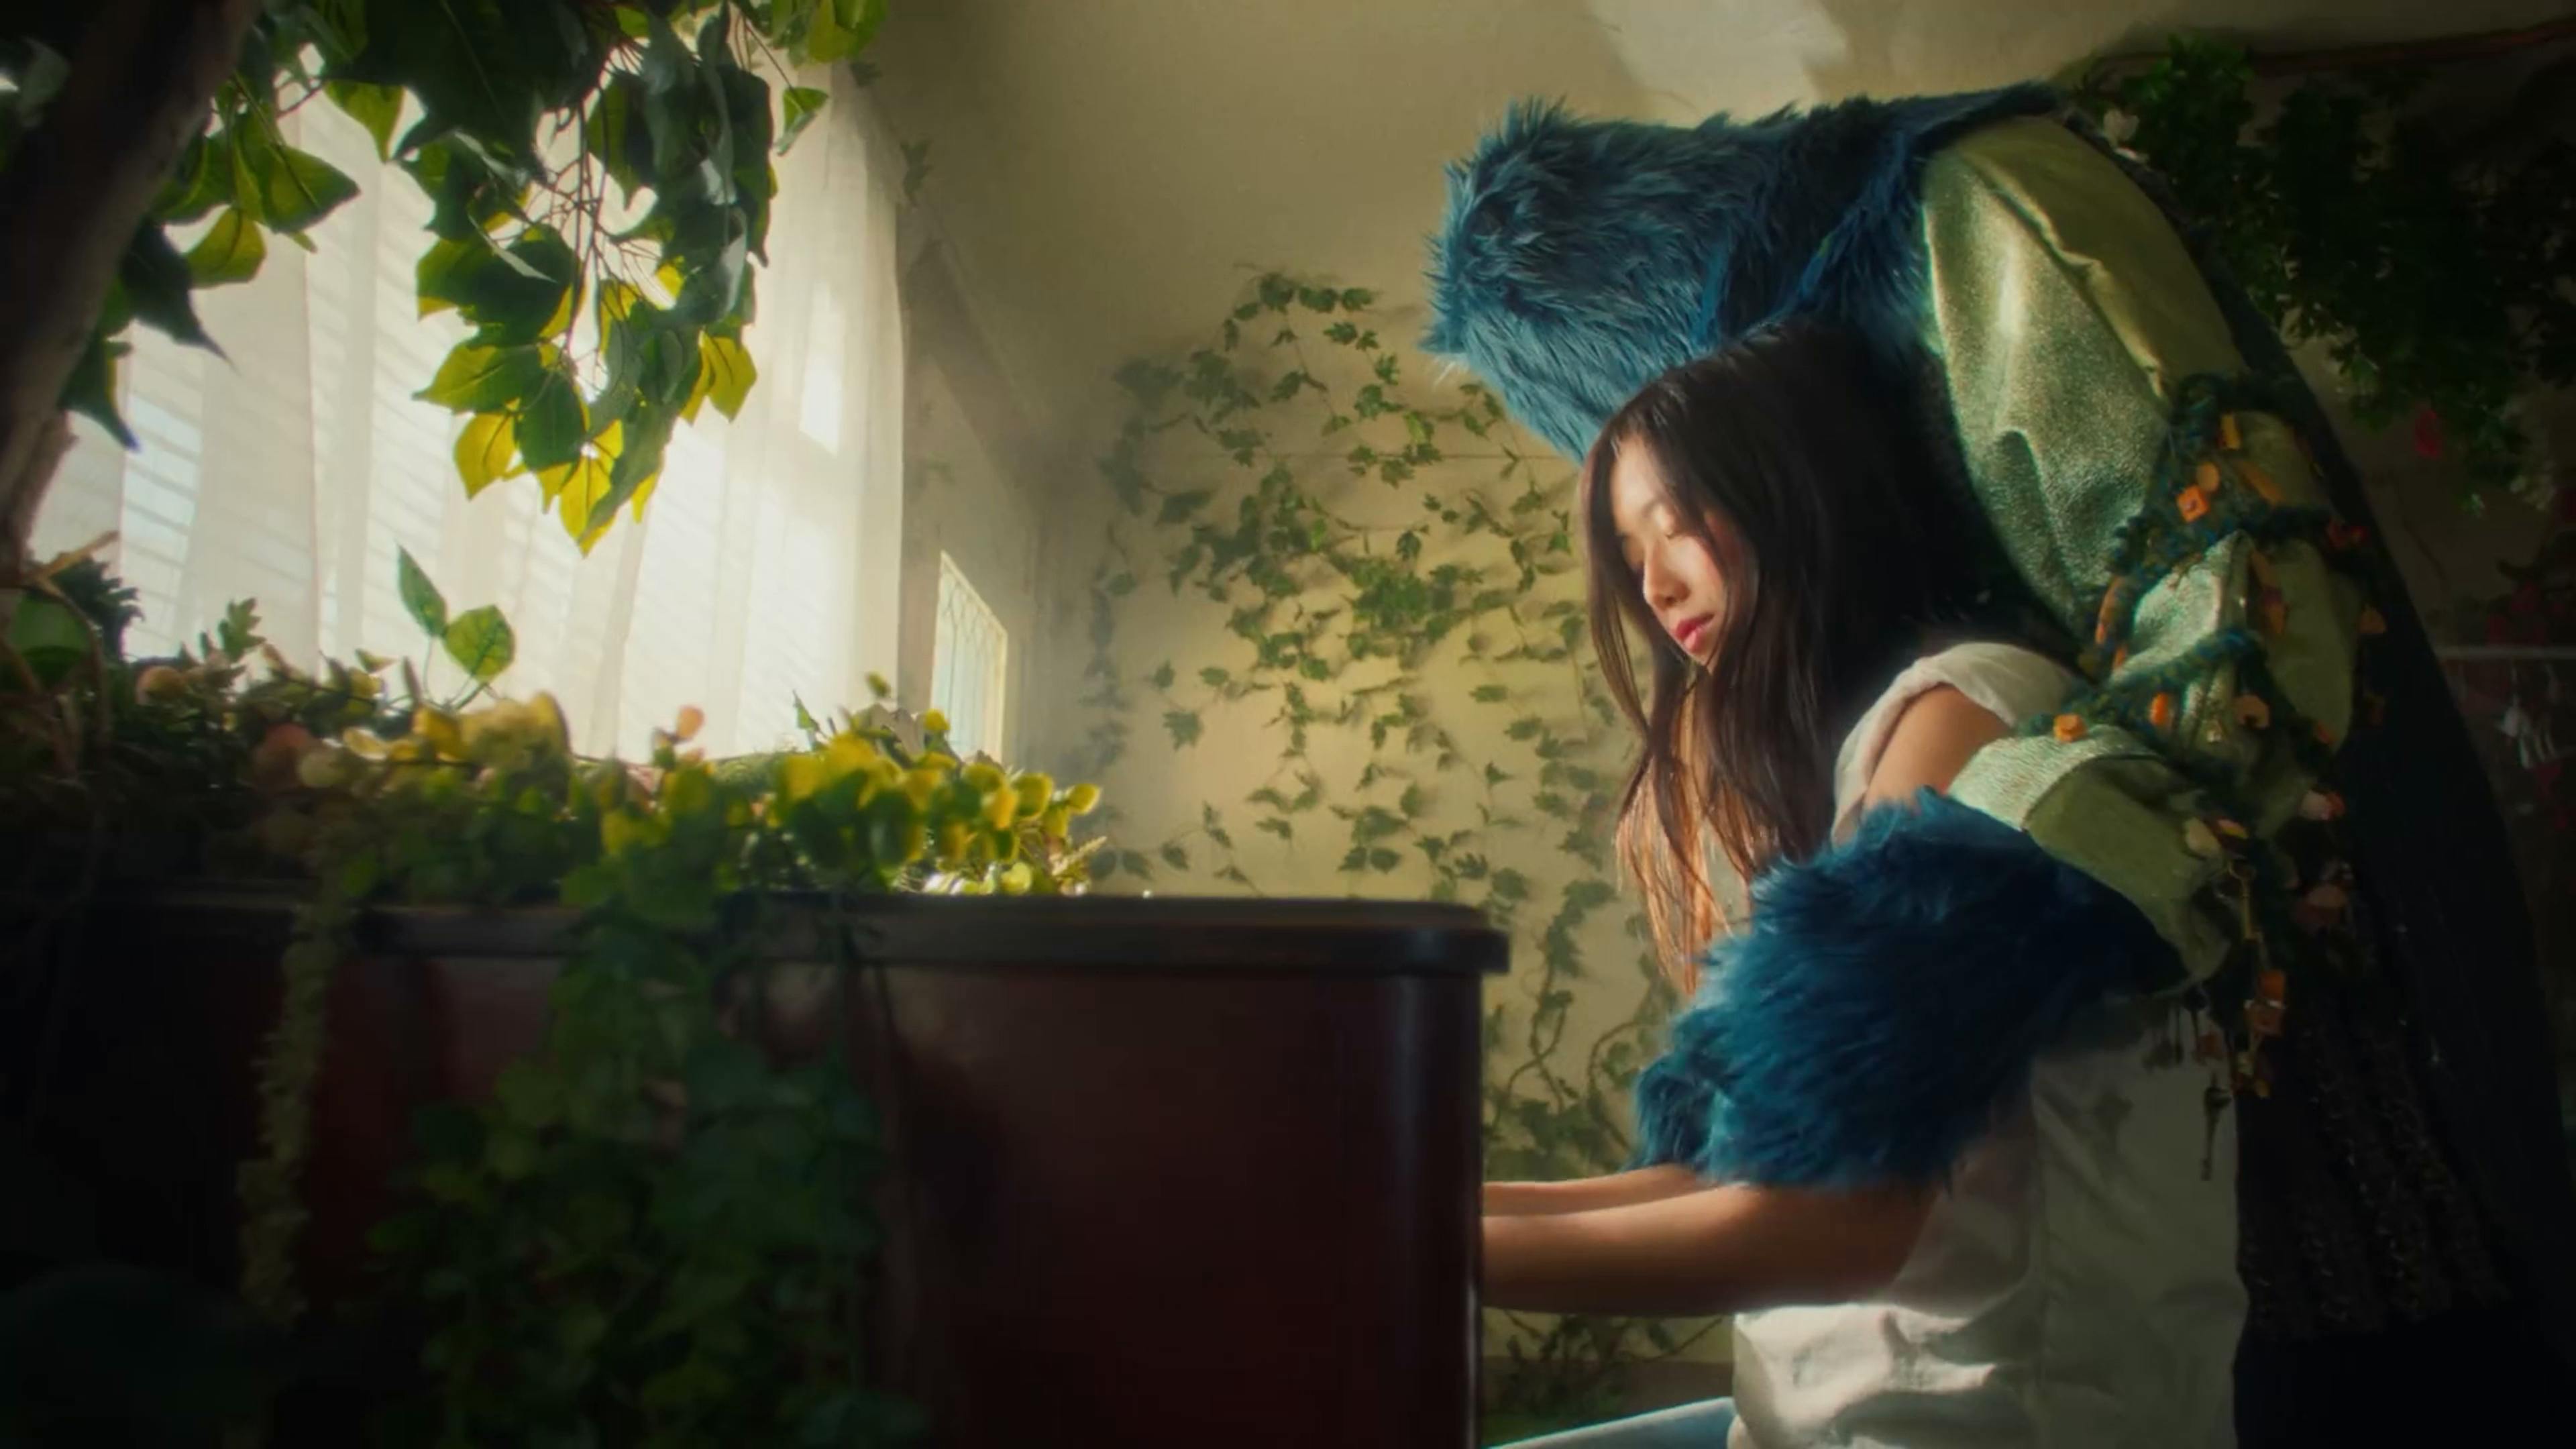 A whimsical still from Sarah Kinsley's music video 'Lovegod' portrays the artist and a creature with blue fur and green embellishments in a sunlit room filled with plants. The artist appears serene as she tends to the greenery, while the creature, standing behind her, adds a touch of fantasy to the scene. The natural light streaming through the blinds creates a warm, inviting atmosphere.